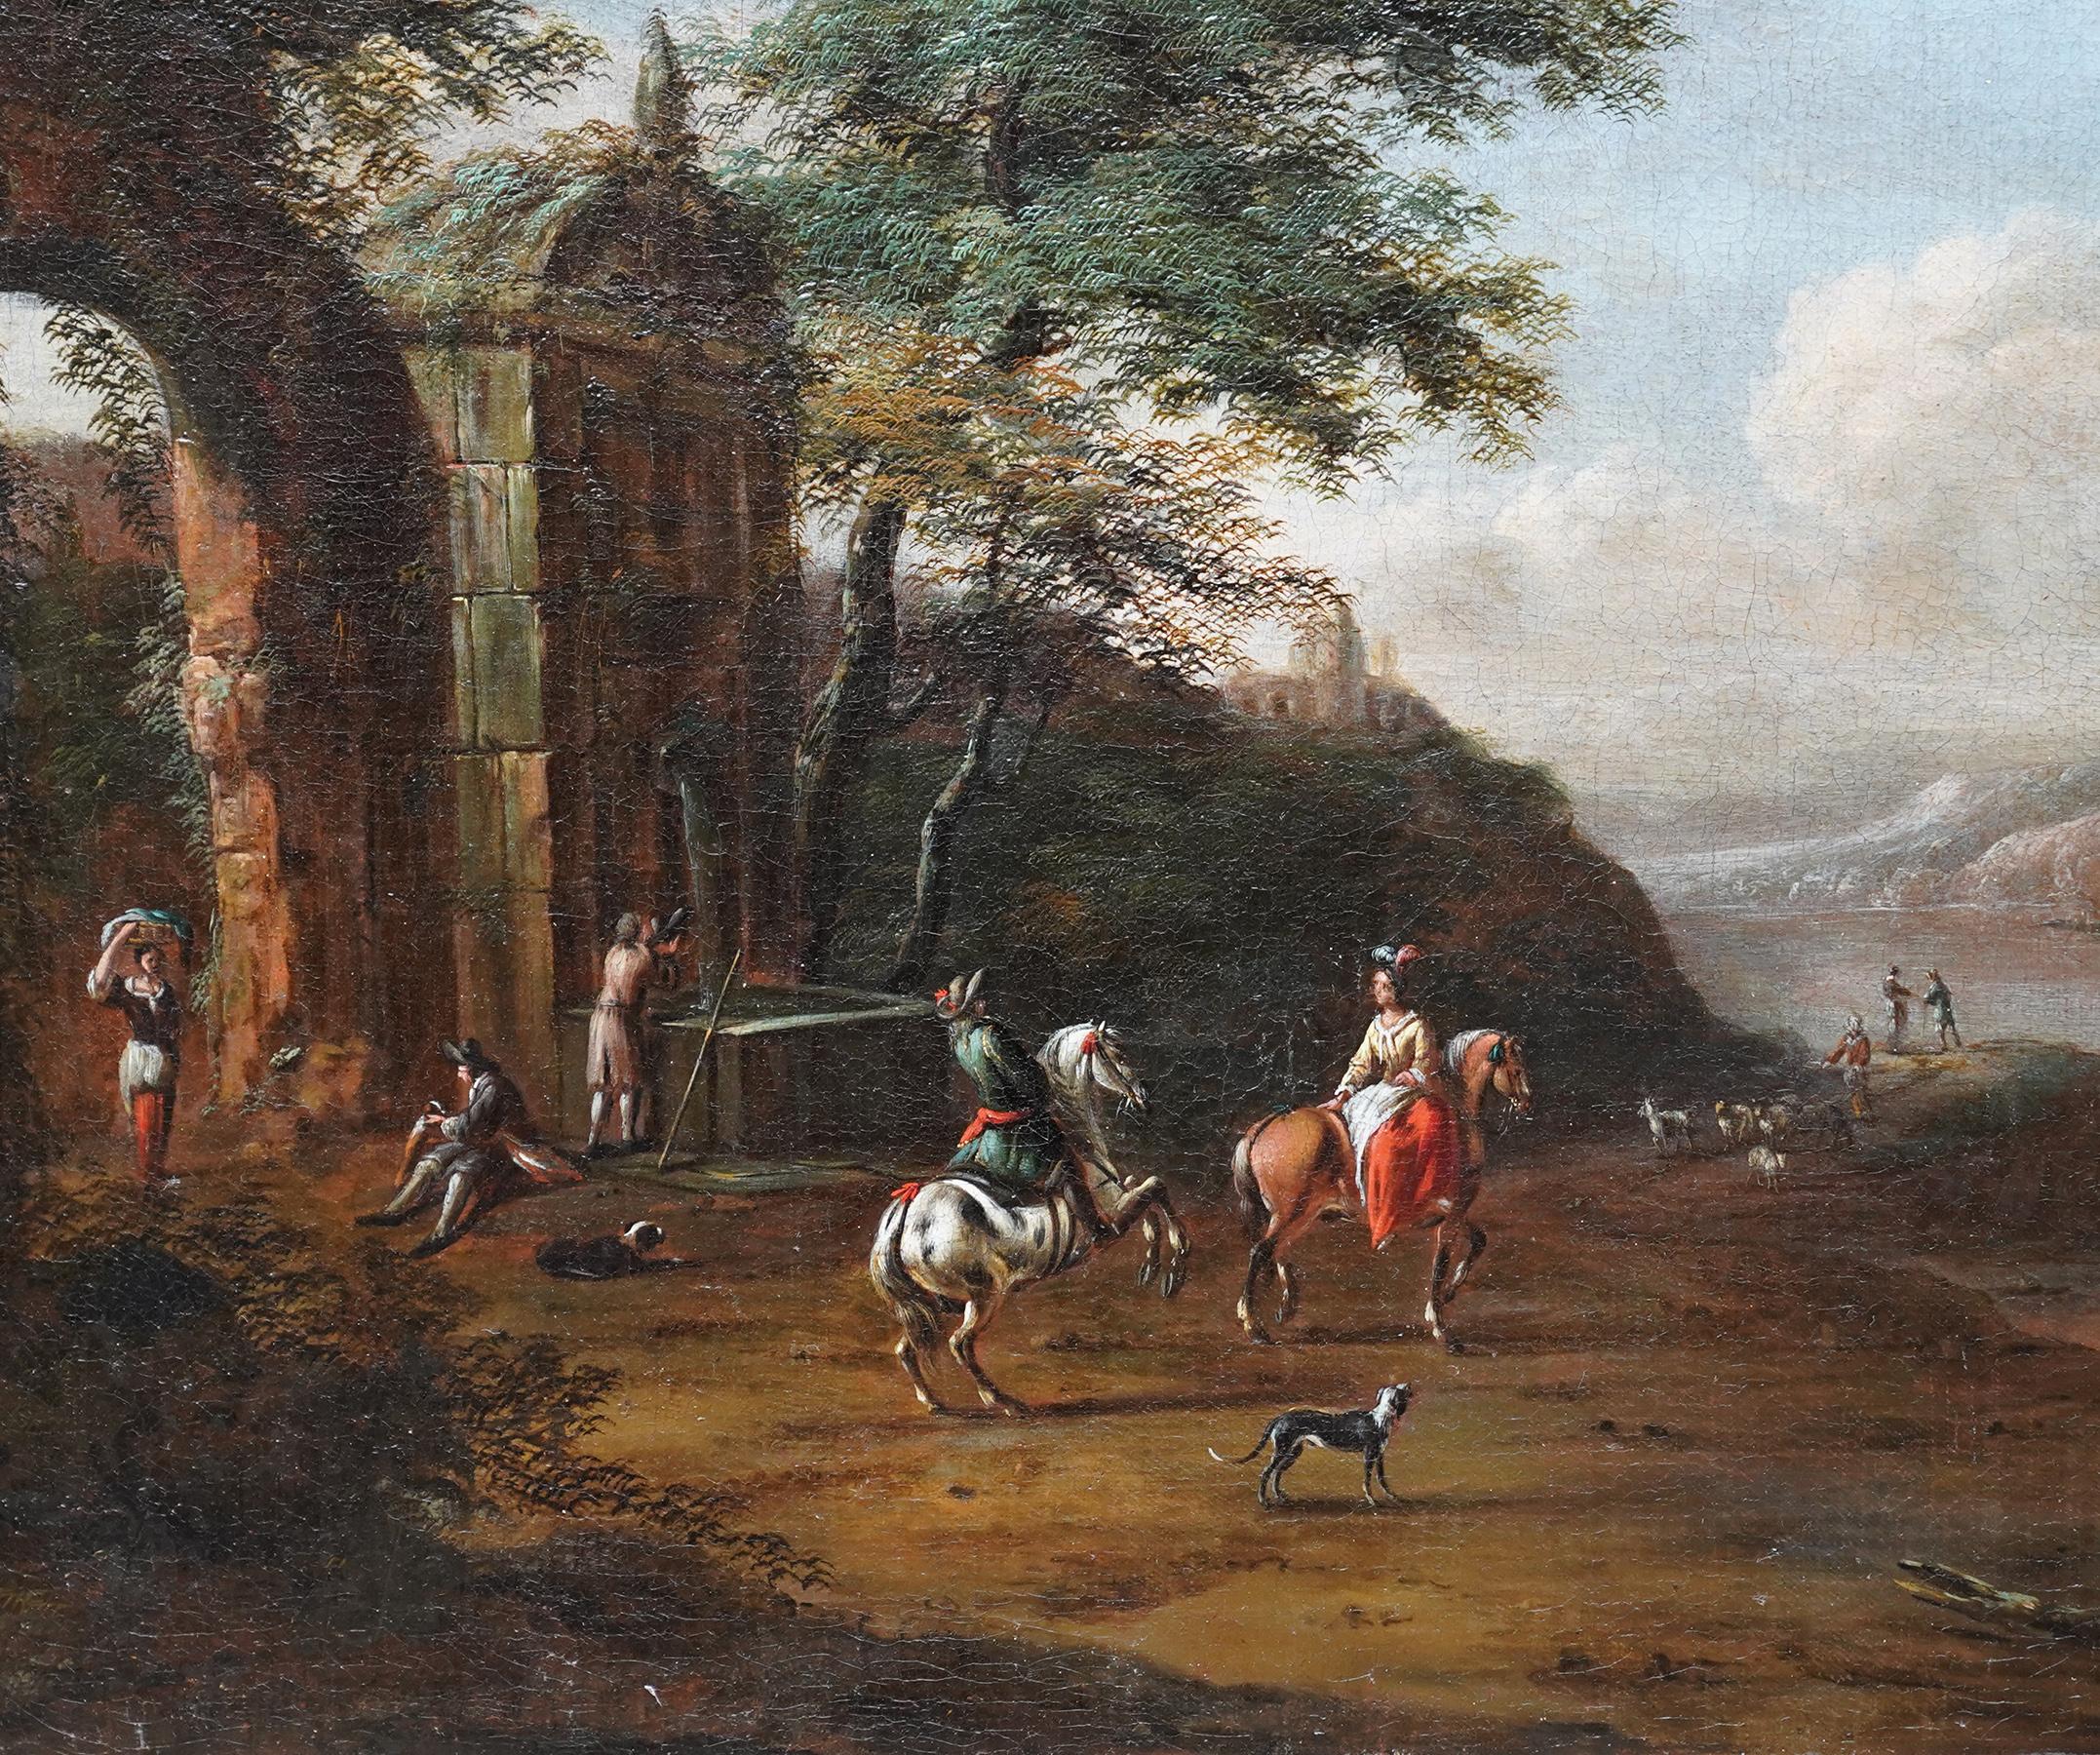 Travellers near Ruins in a Landscape - Dutch Old Master art figural oil painting For Sale 2